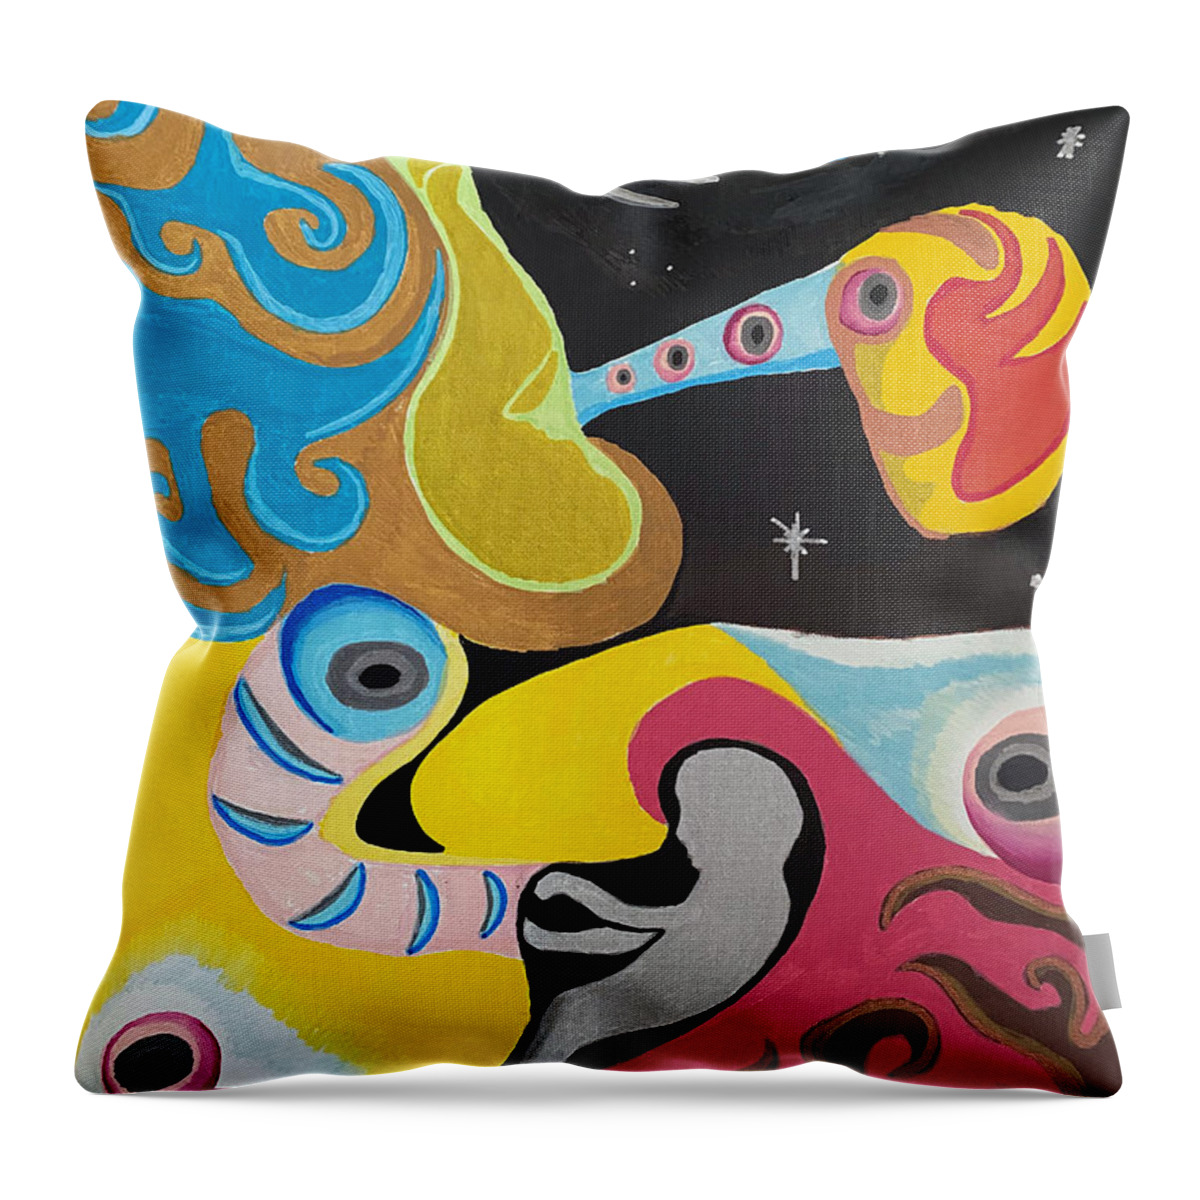 Surreal Throw Pillow featuring the mixed media Embracing Potentials by Jeff Malderez